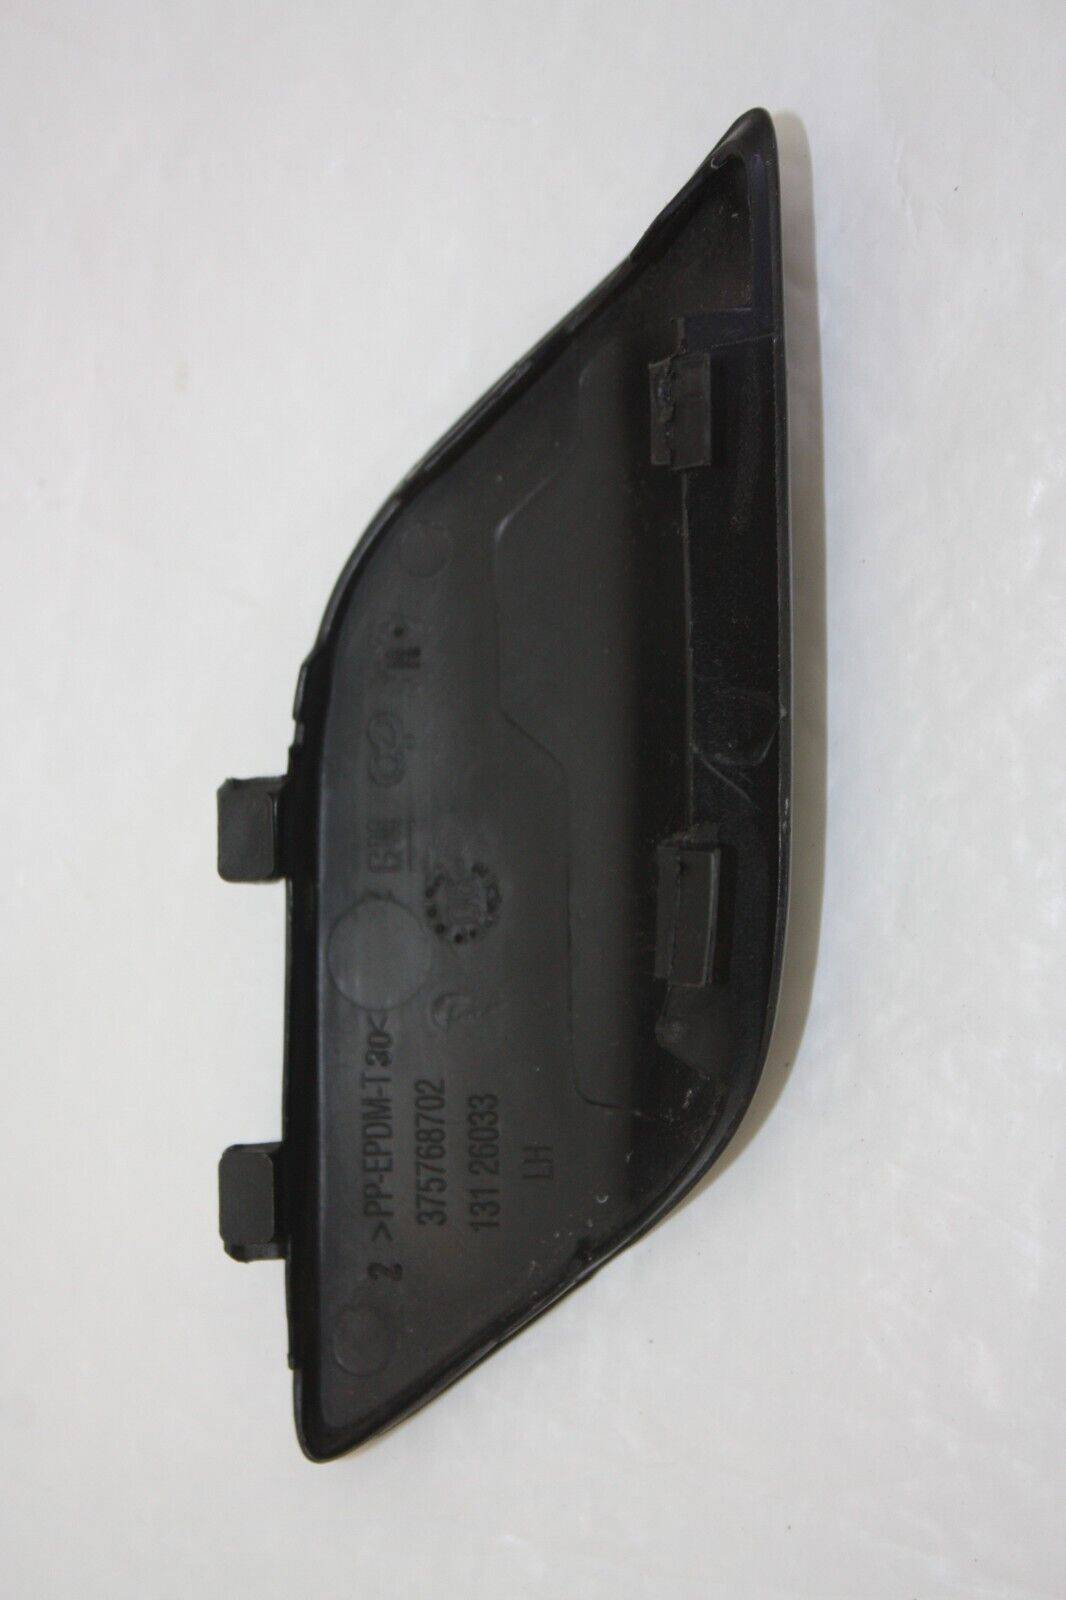 Vauxhall-Astra-H-Front-Bumper-Left-Washer-Cover-2004-to-2009-13126033-Genuine-176245366402-4